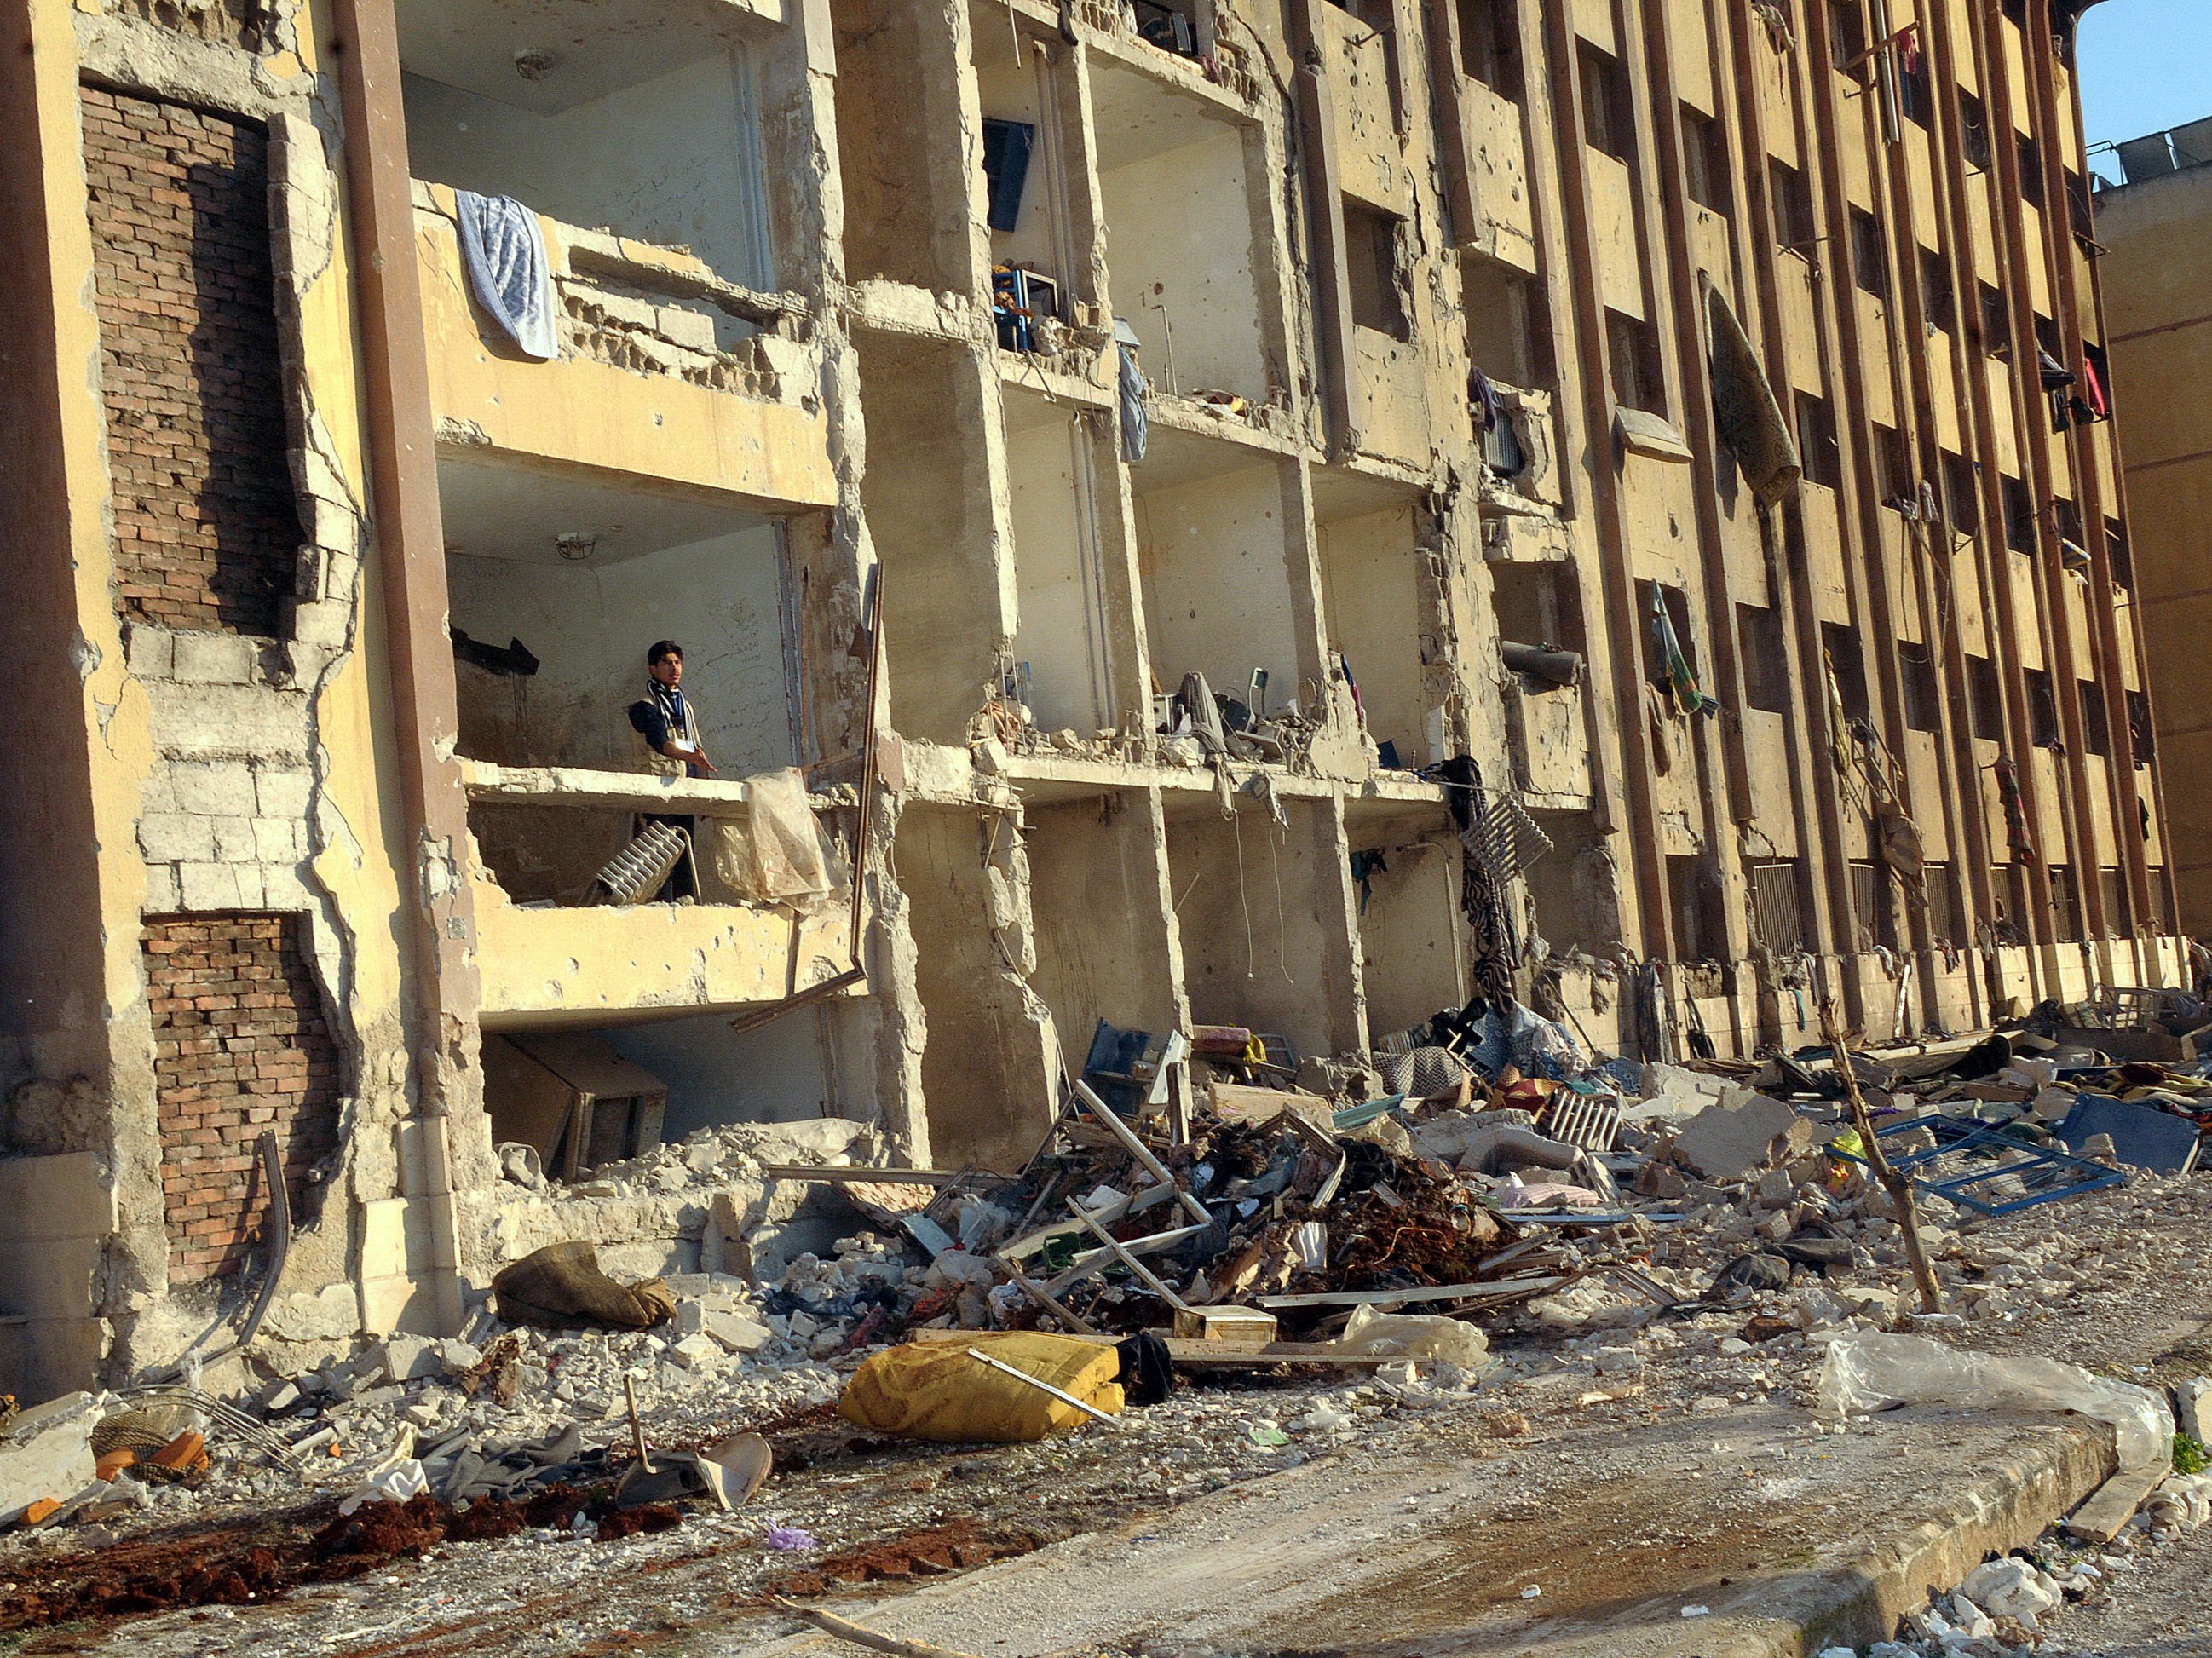 A Syrian man stands in the debris following an explosion outside Aleppo University in January 2013